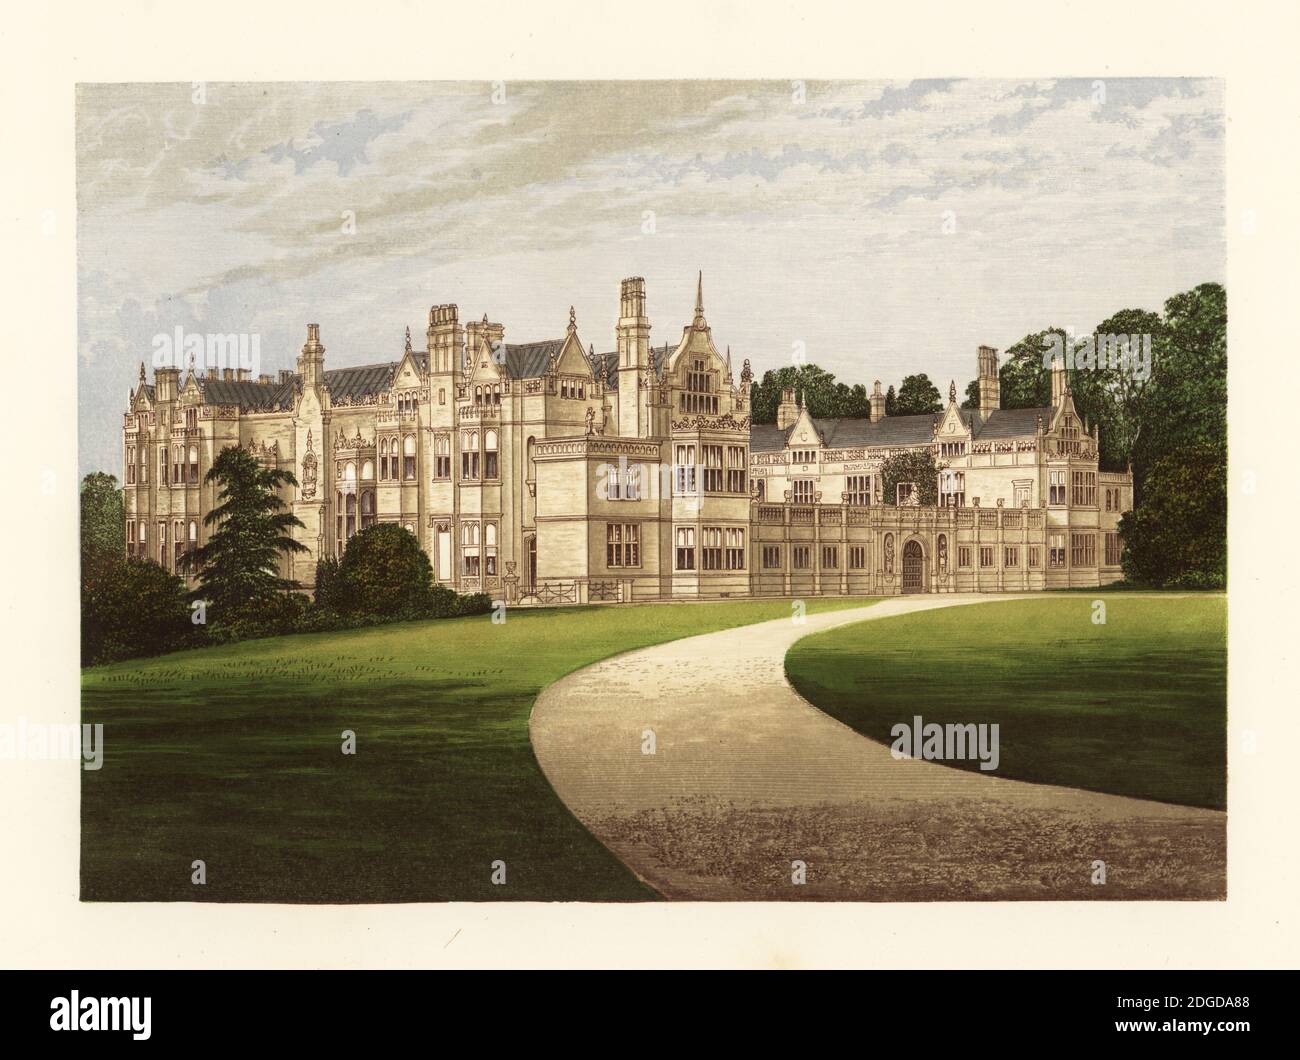 Rushton Hall, Northamptonshire, England. Built by Sir Thomas Tresham in 1527, home of Miss Clara Thornhill and her husband William Capel Clarke-Thornhill. Colour woodblock by Benjamin Fawcett in the Baxter process of an illustration by Alexander Francis Lydon from Reverend Francis Orpen Morris’s A Series of Picturesque Views of the Seats of Noblemen and Gentlemen of Great Britain and Ireland, William Mackenzie, London, 1880. Stock Photo